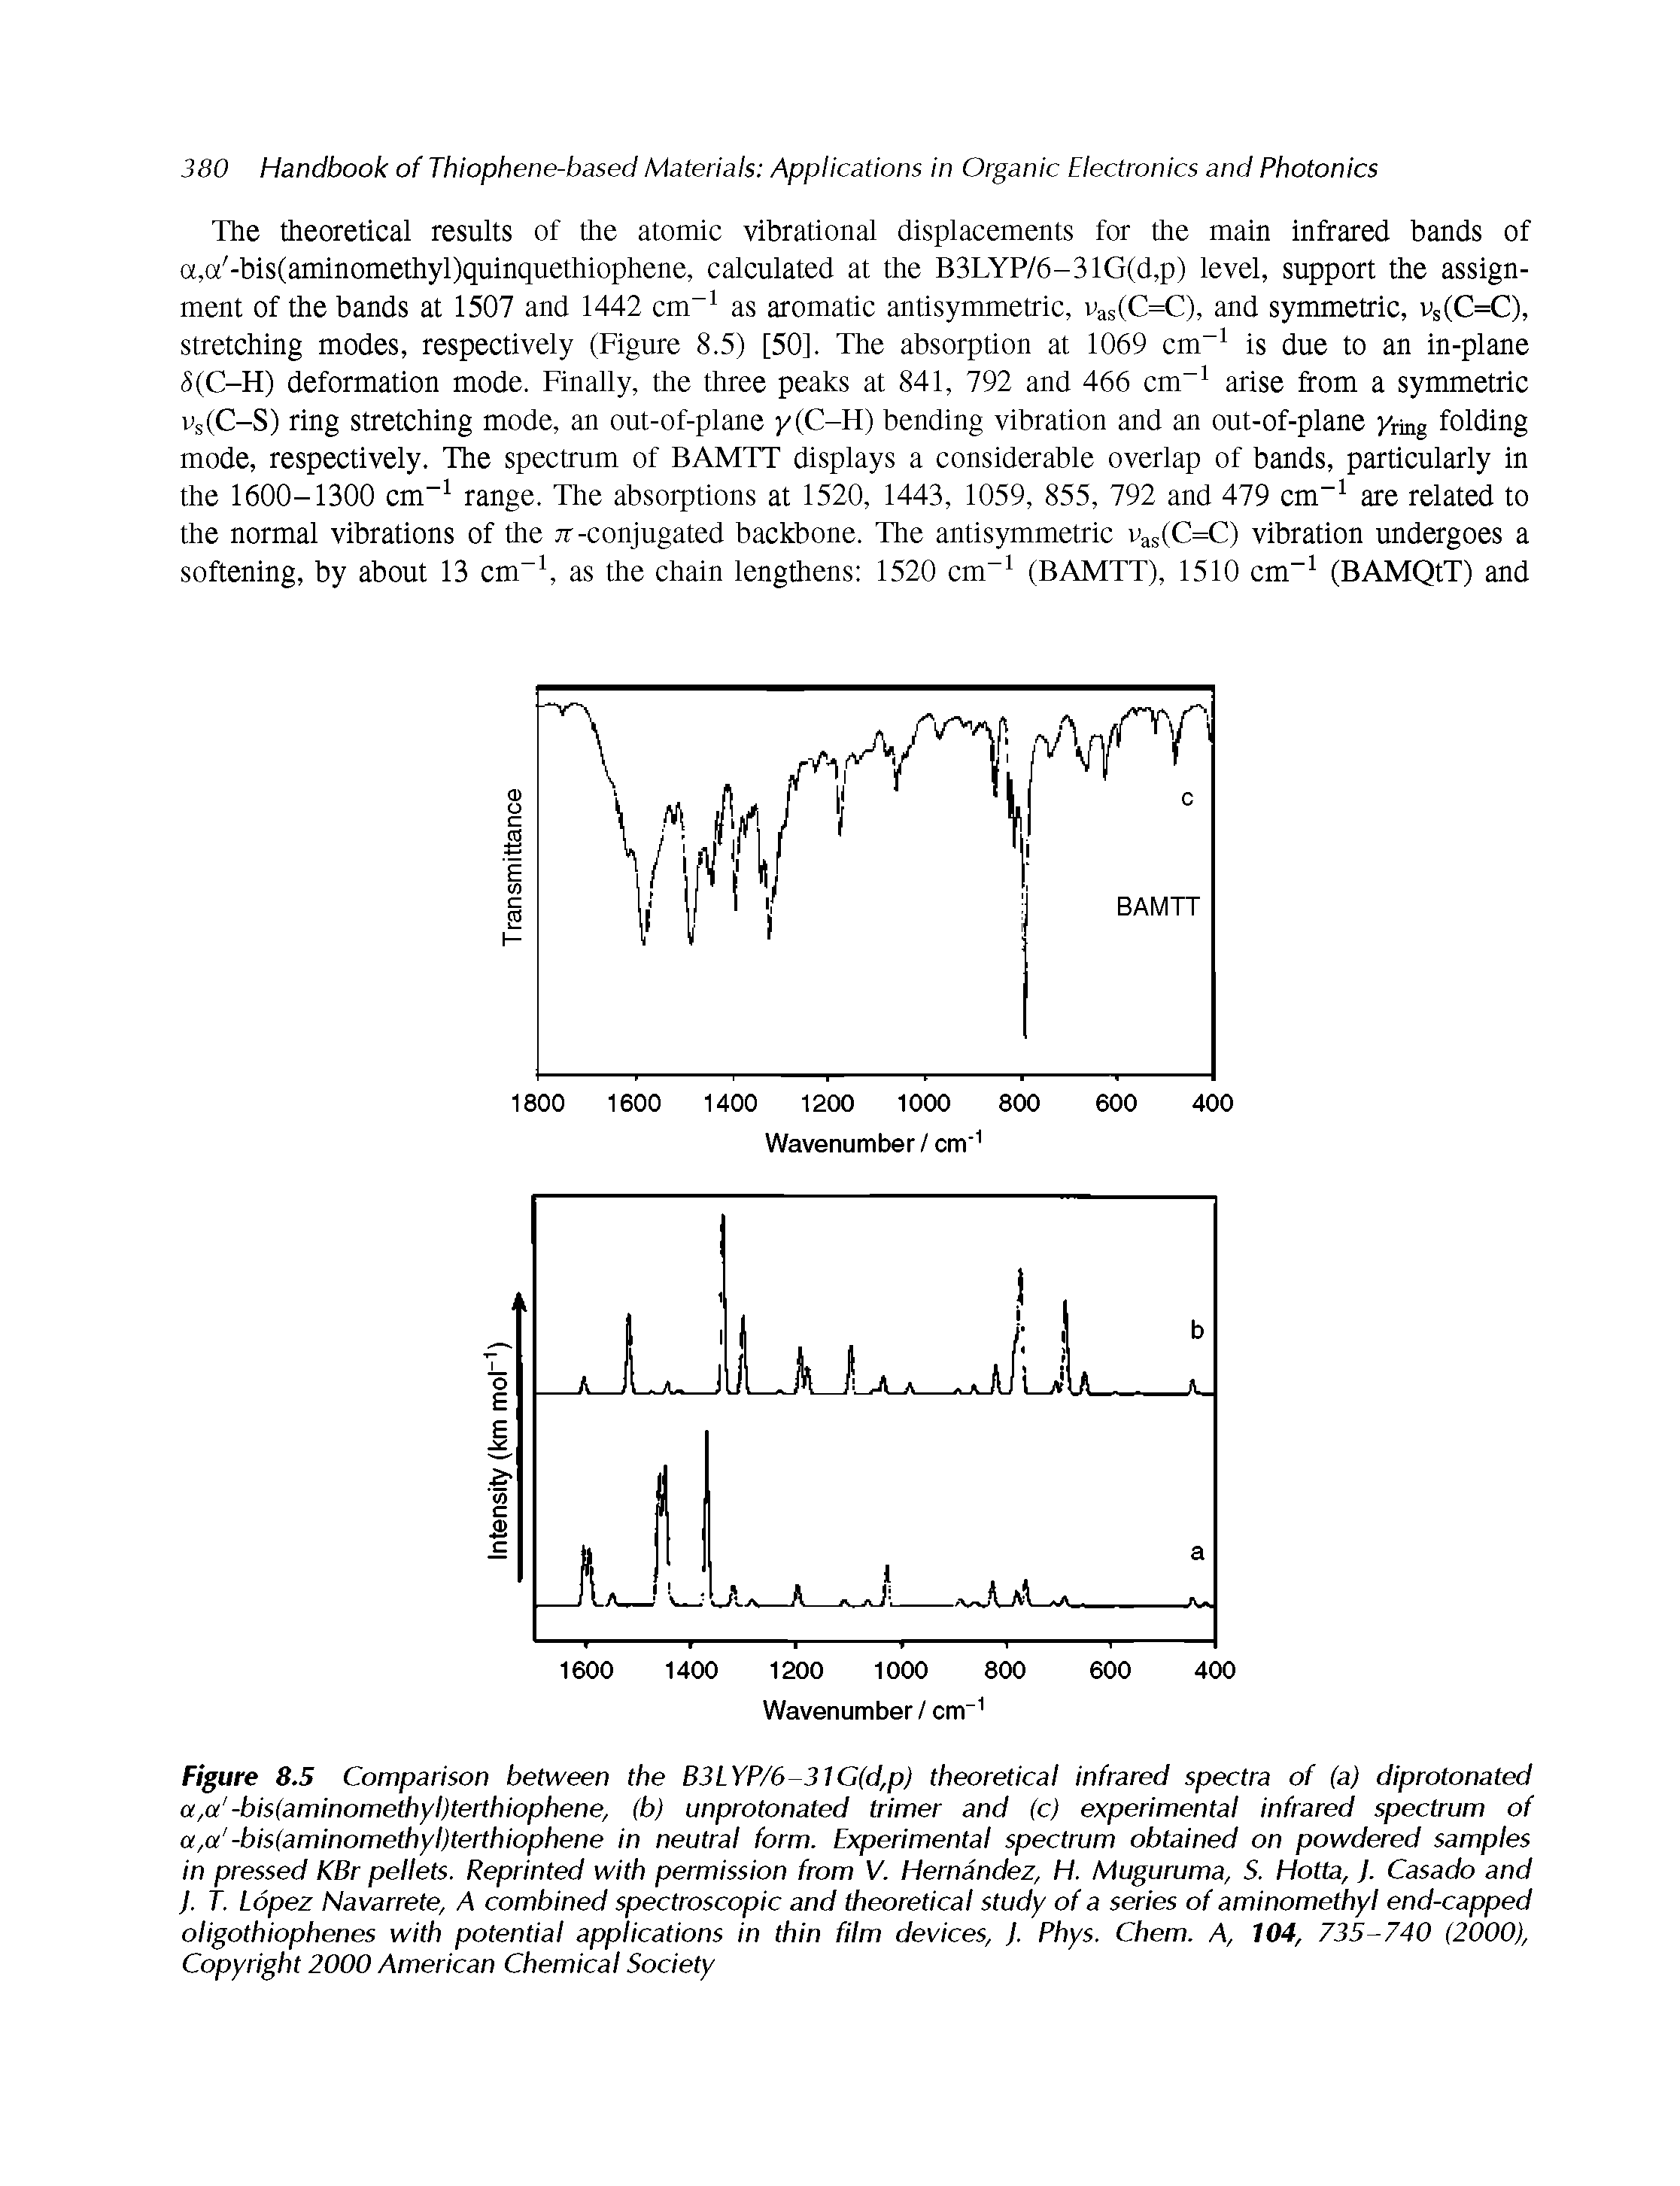 Figure 8.5 Comparison between the B3LYP/6-31 G(d,p) theoretical infrared spectra of (a) diprotonated a,a -bis(aminomethyl)terthiophene, (b) unprotonated trimer and (c) experimental infrared spectrum of a,a -bis(aminomethyl)terthiophene in neutral form. Experimental spectrum obtained on powdered samples in pressed KBr pellets. Reprinted with permission from V. Hernandez, H. Muguruma, S. Hotta, J. Casado and ). T. Lopez Navarrete, A combined spectroscopic and theoretical study of a series of aminomethyl end-capped oligothiophenes with potential applications in thin film devices, J. Phys. Chem. A, 104, 735-740 (2000), Copyright 2000 American Chemical Society...